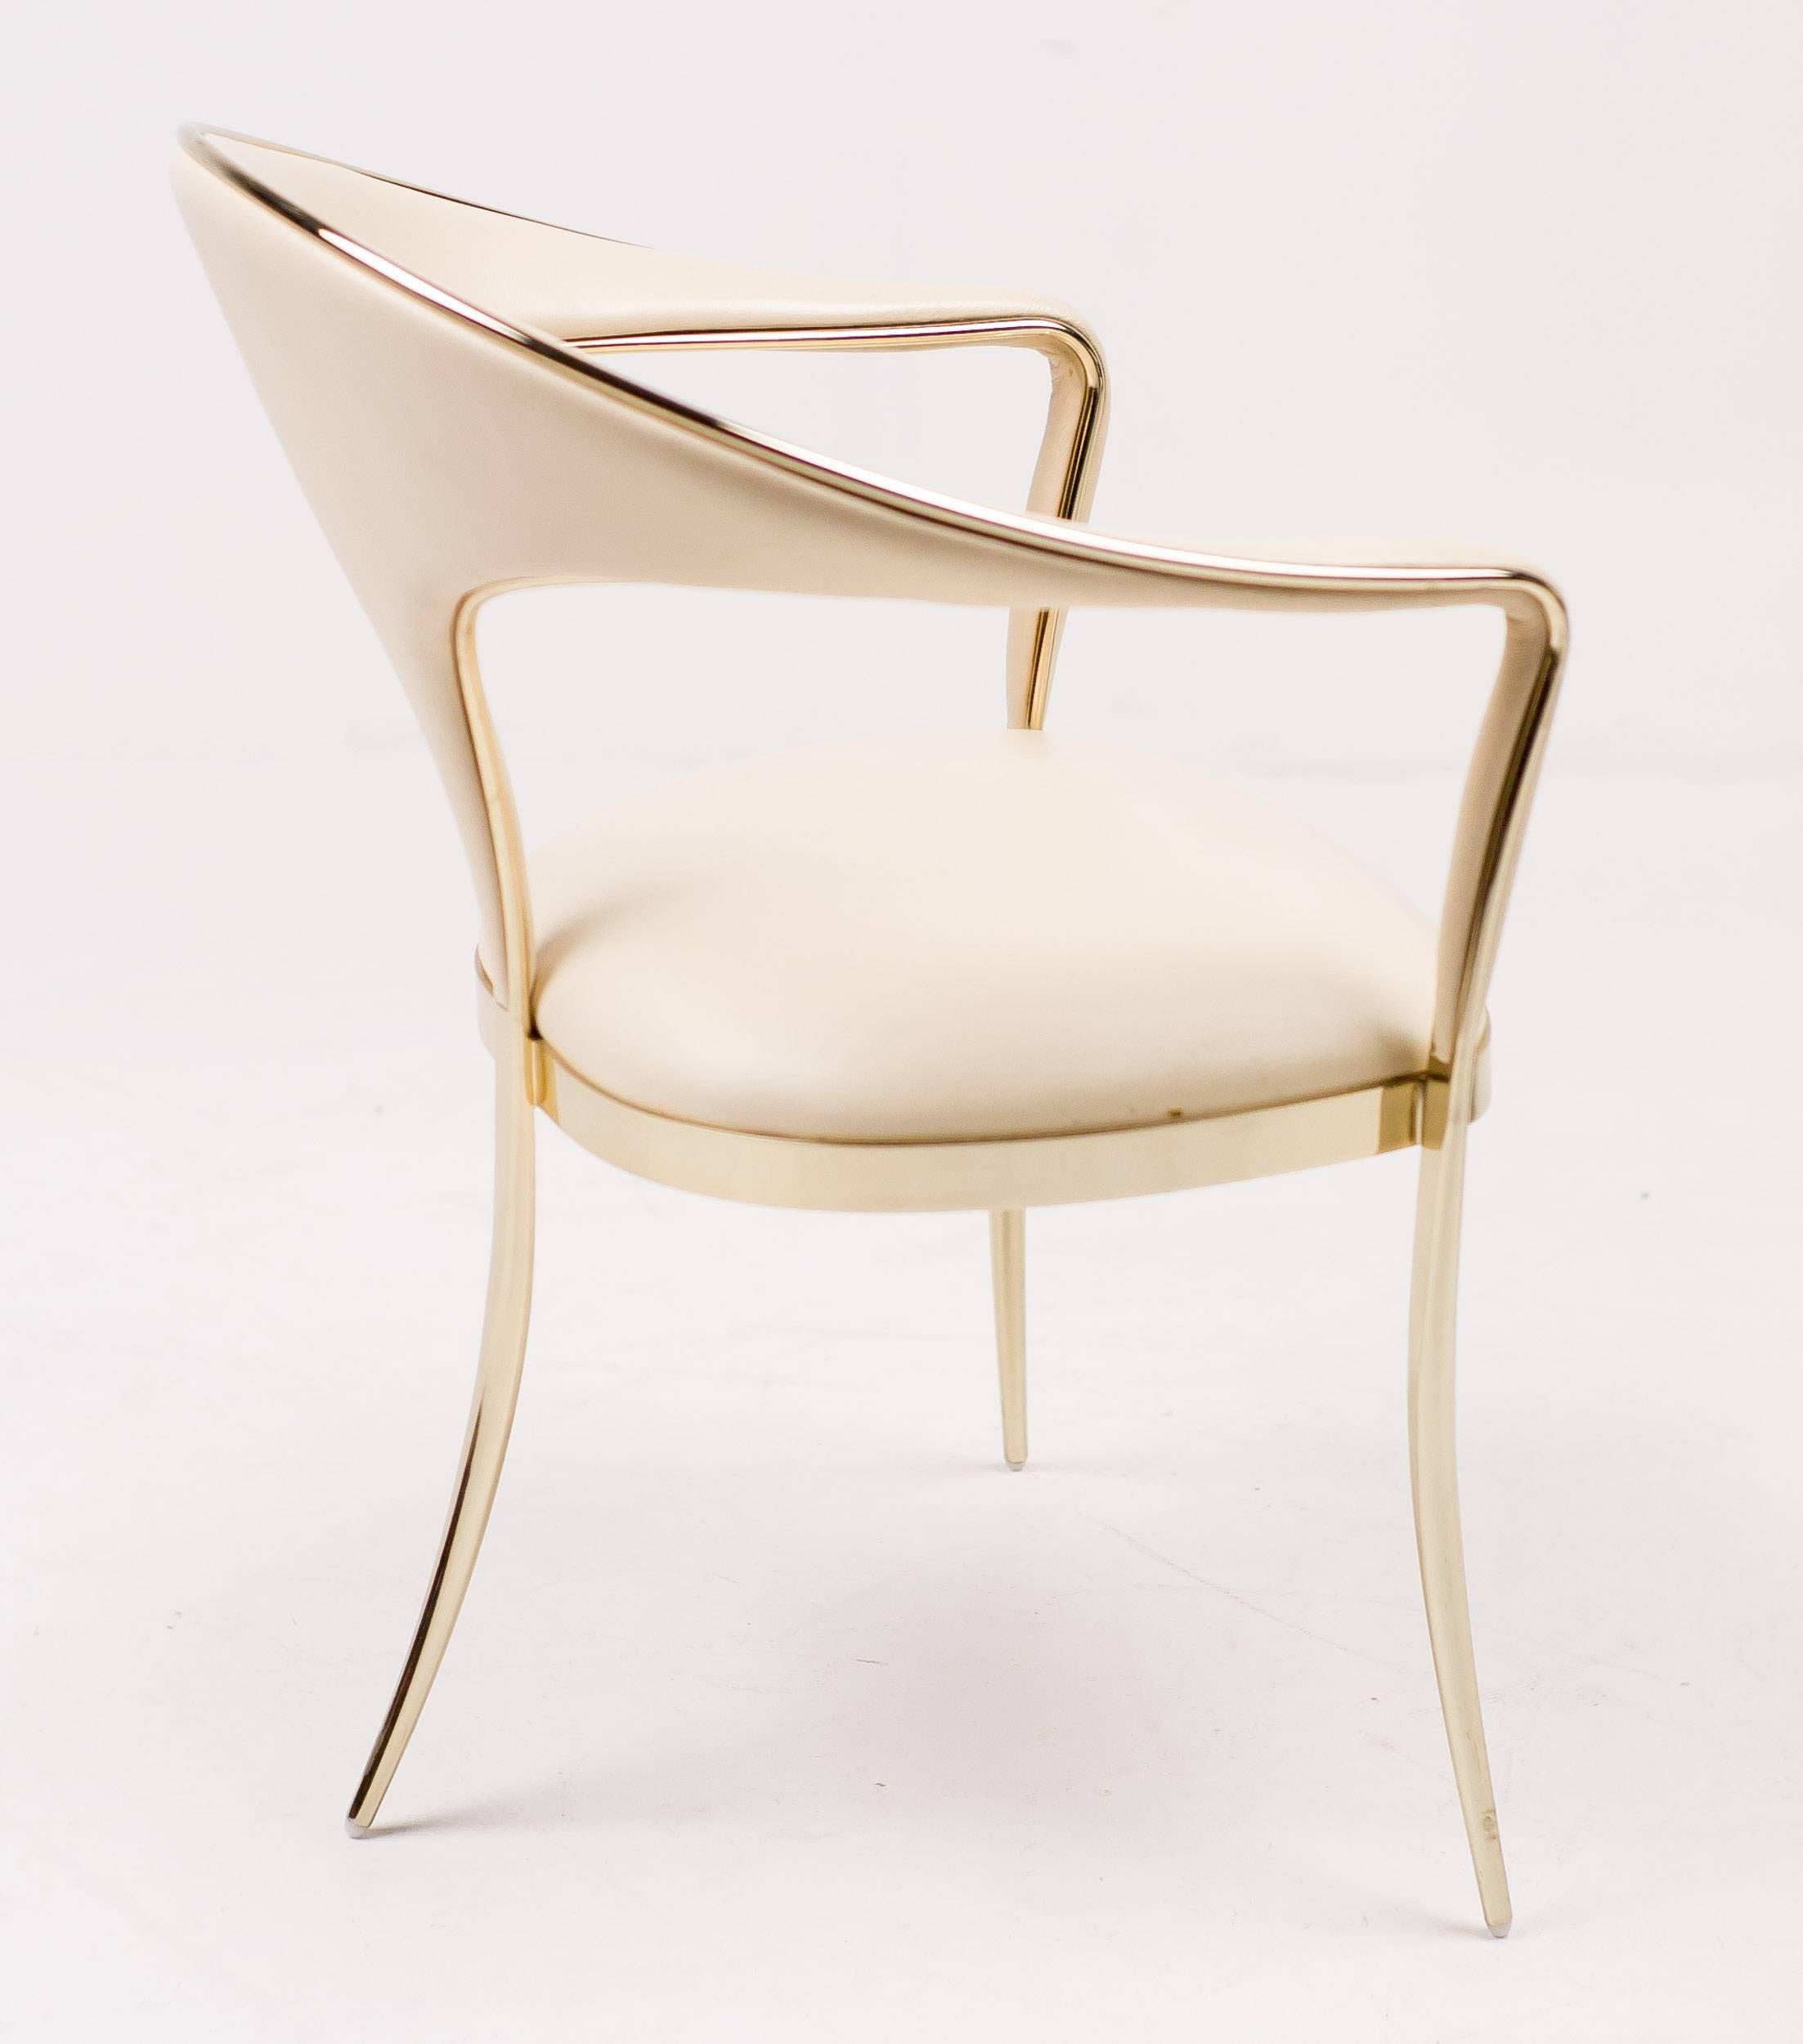 Elegant set of four Vidal Grau Cosmos chairs.
Polished brass frame and legs, upholstery in nappa leather.
With brass label under the seat of each chair.

Excellent fast and affordable worldwide shipping.
White glove delivery available upon